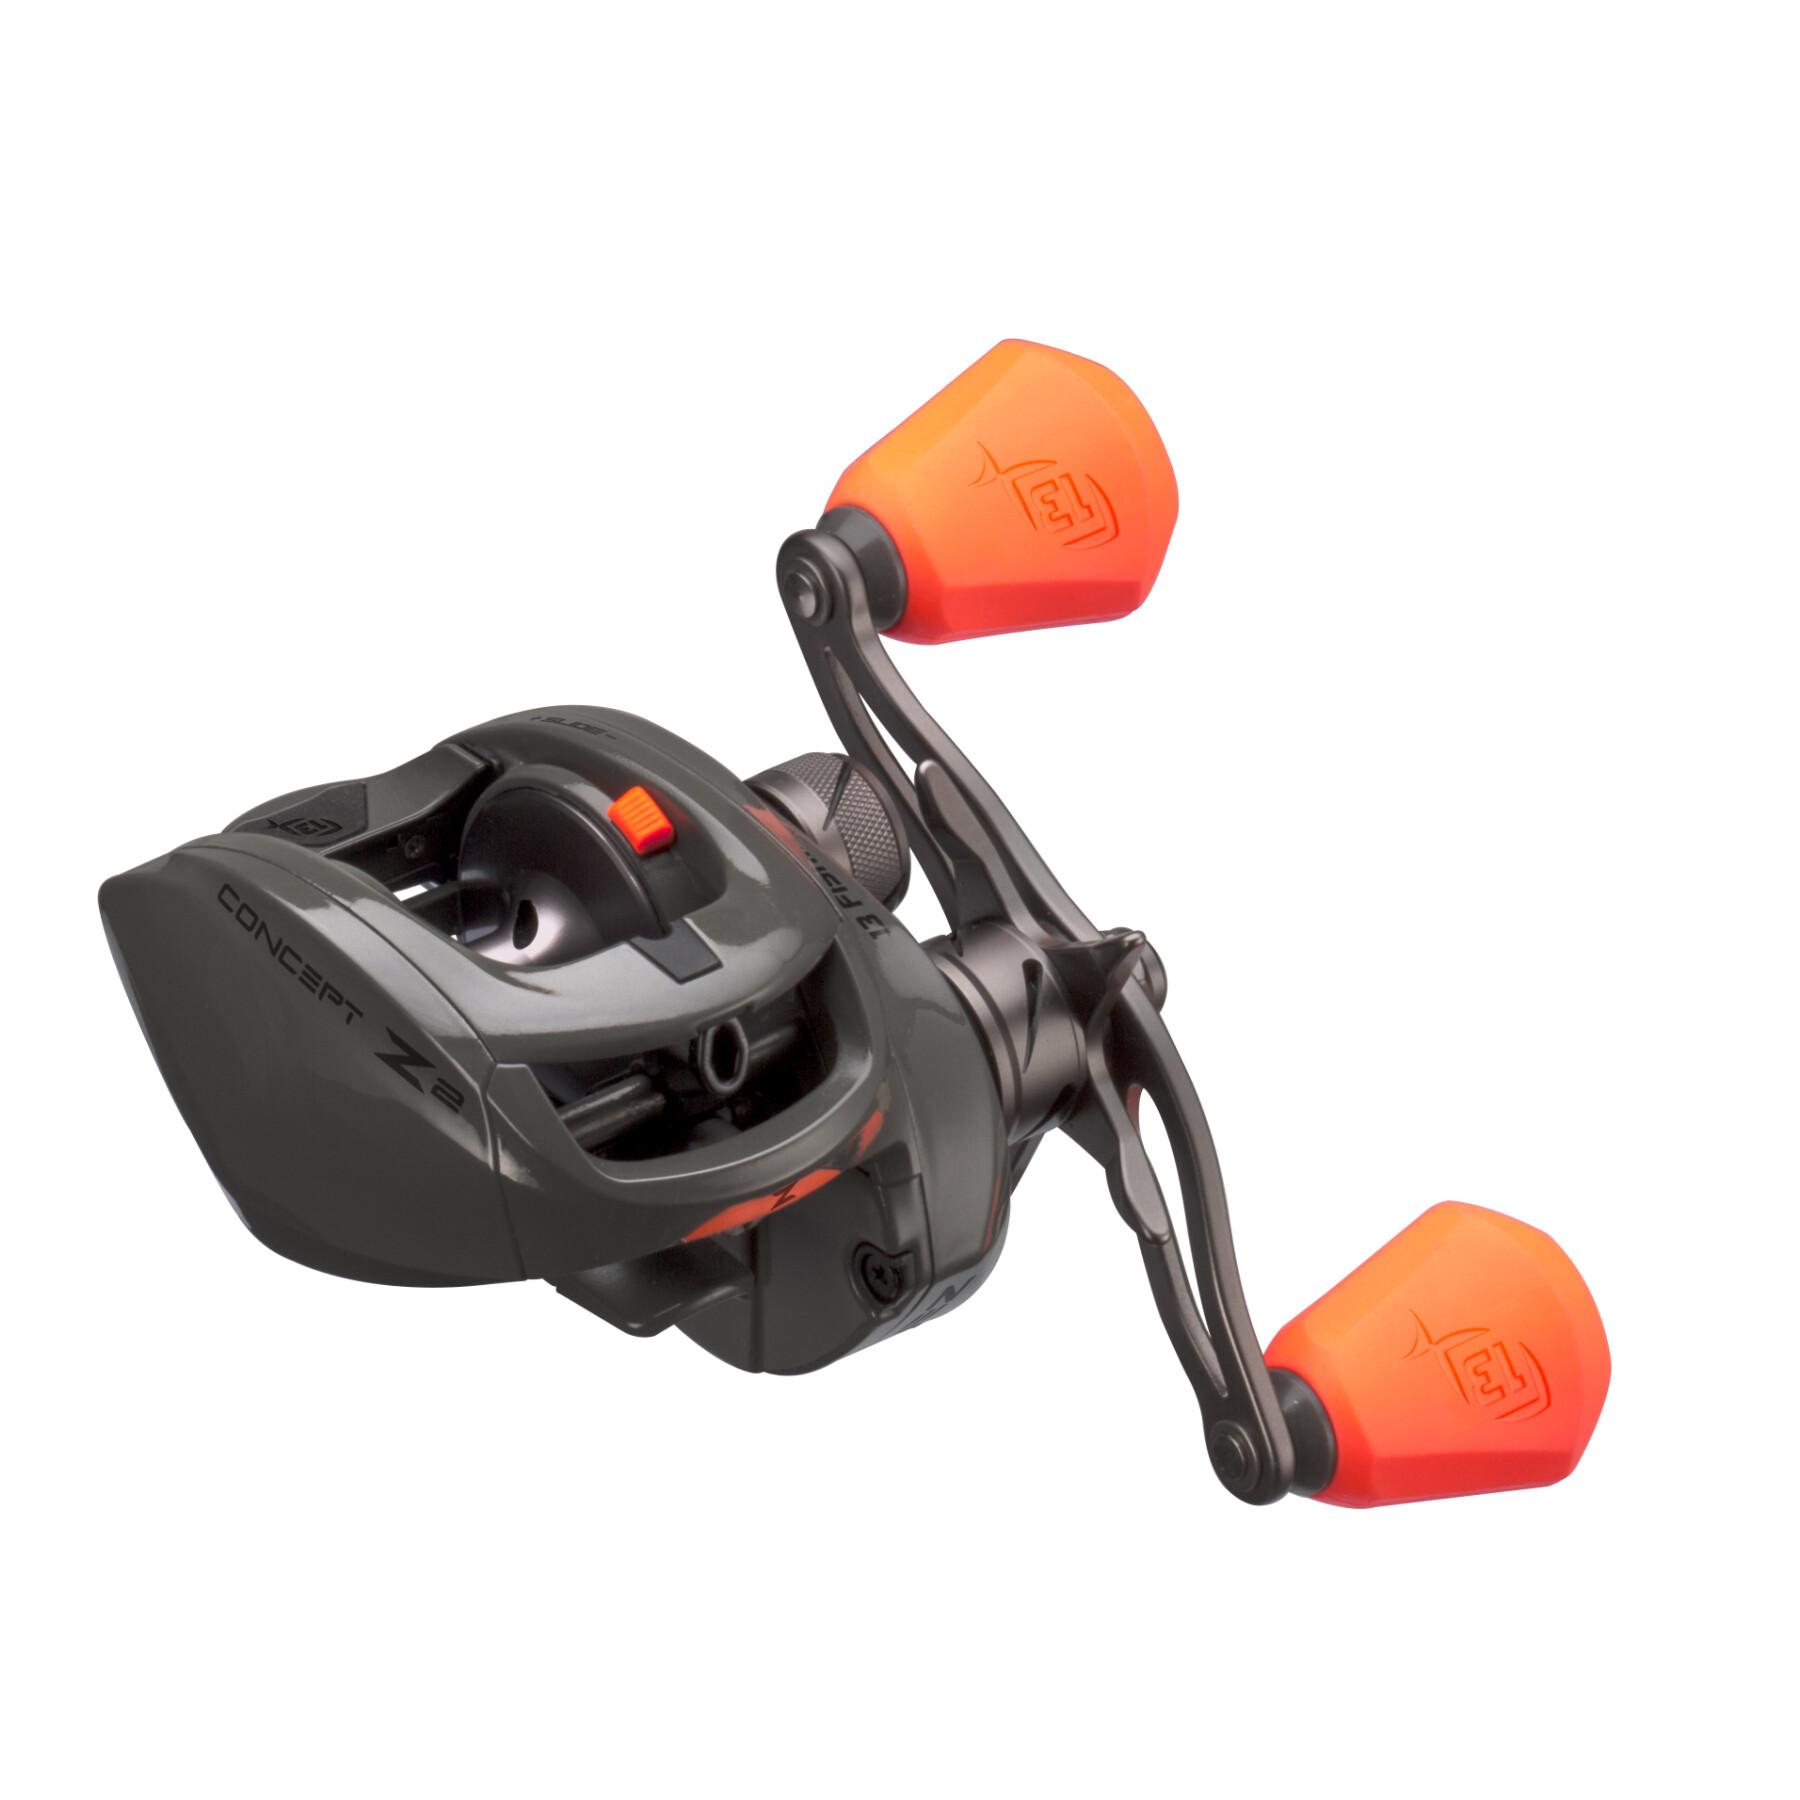 Rolle 13 Fishing Concept Z sld 7.5:1 rh